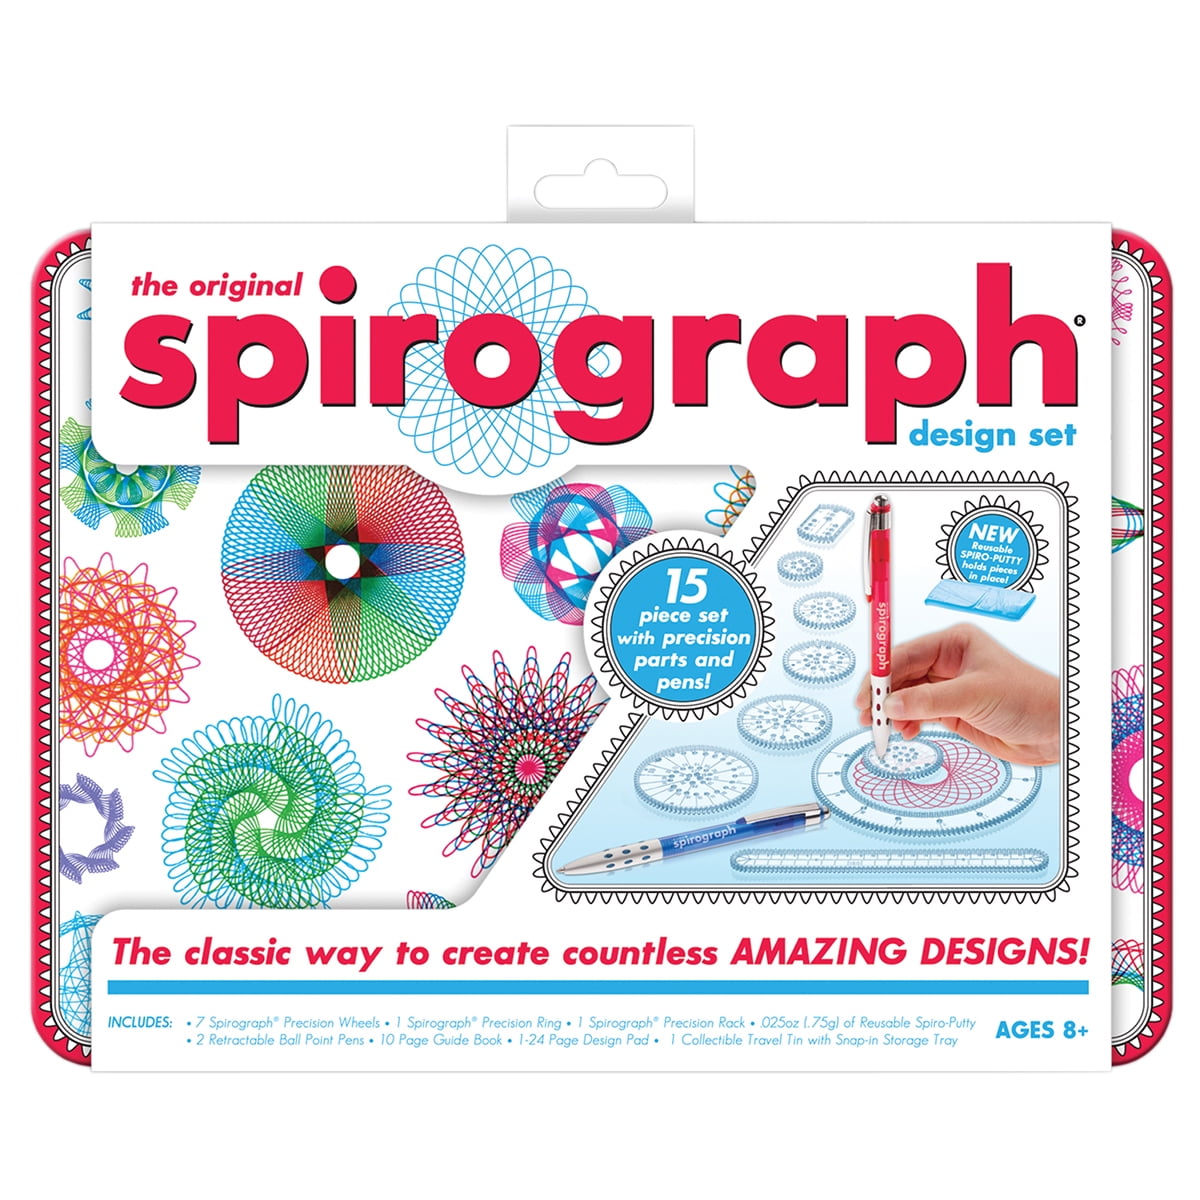 Spirograph Design Set Fun For Young & Adult Deluxe Original Drawing Art Toy Game 